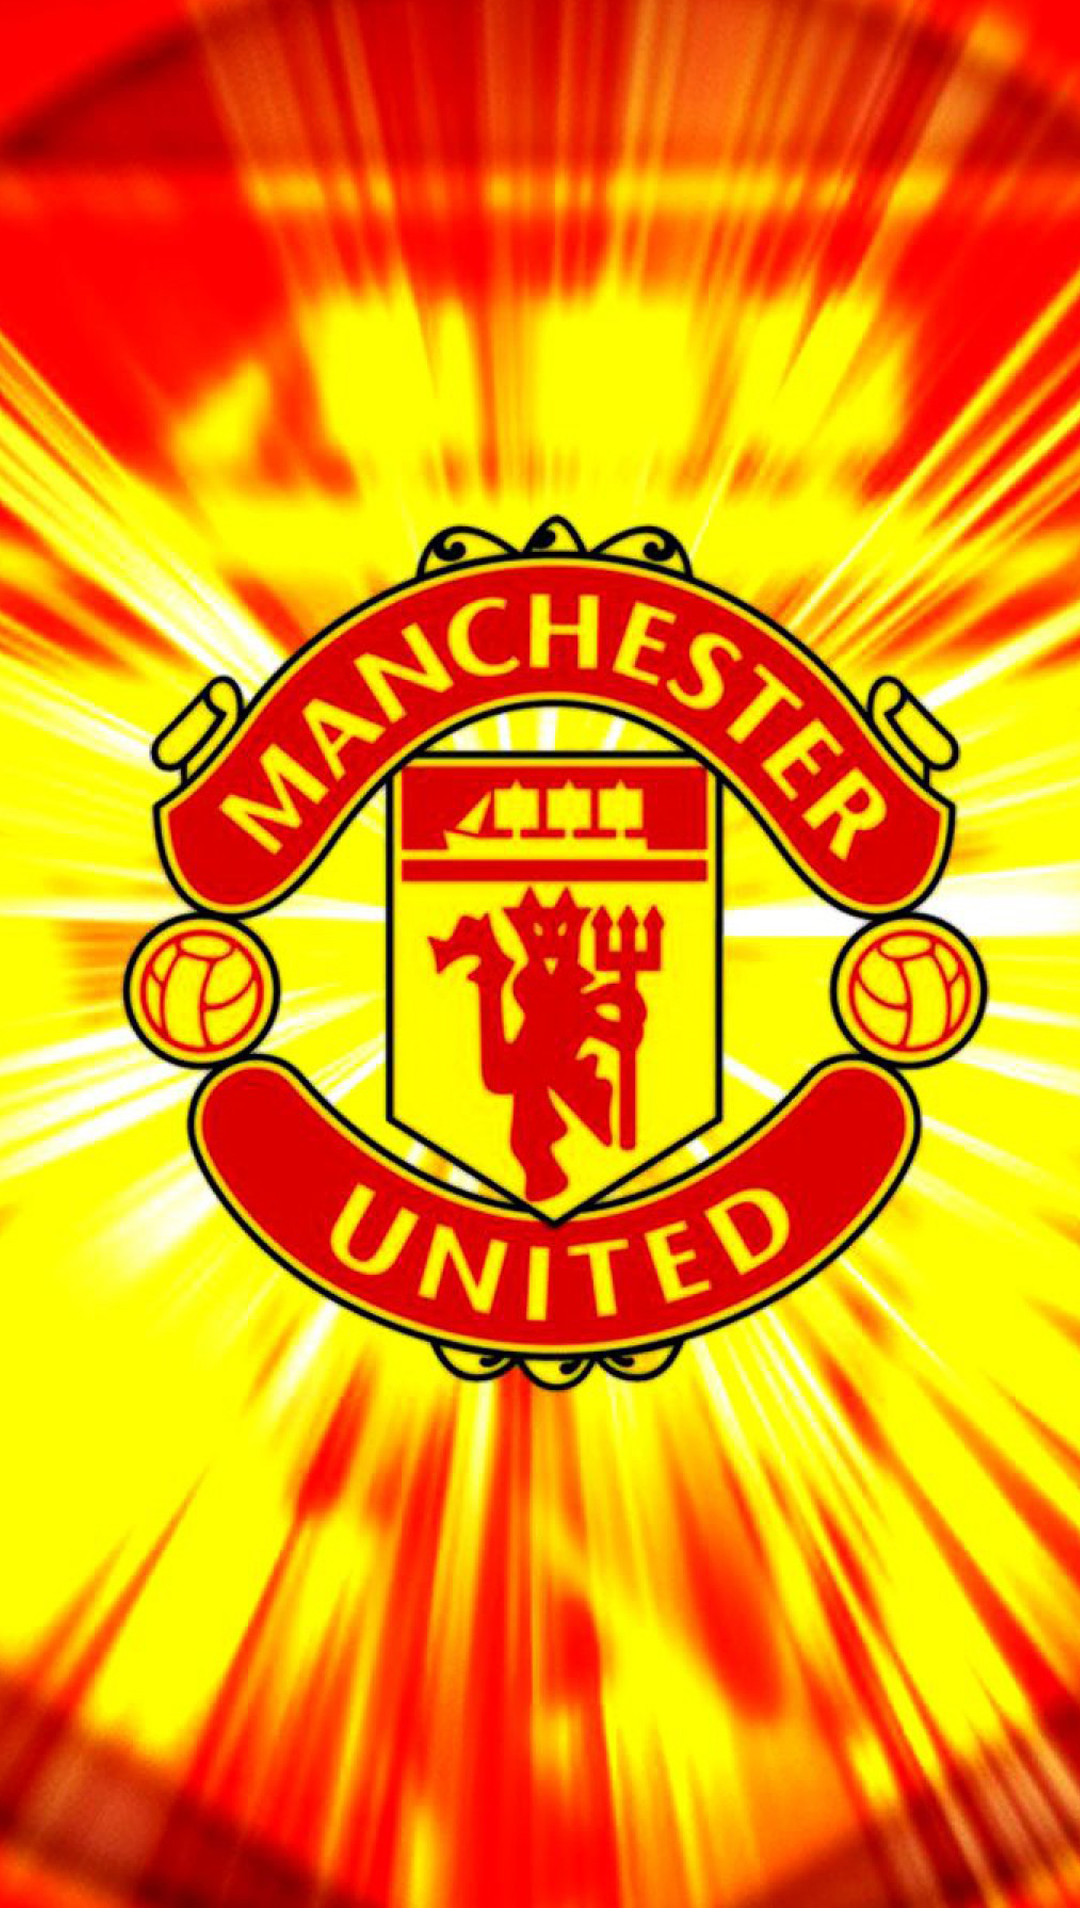 Apple iPhone 6 Plus HD Wallpaper – Manchester United in with red and yellow background #